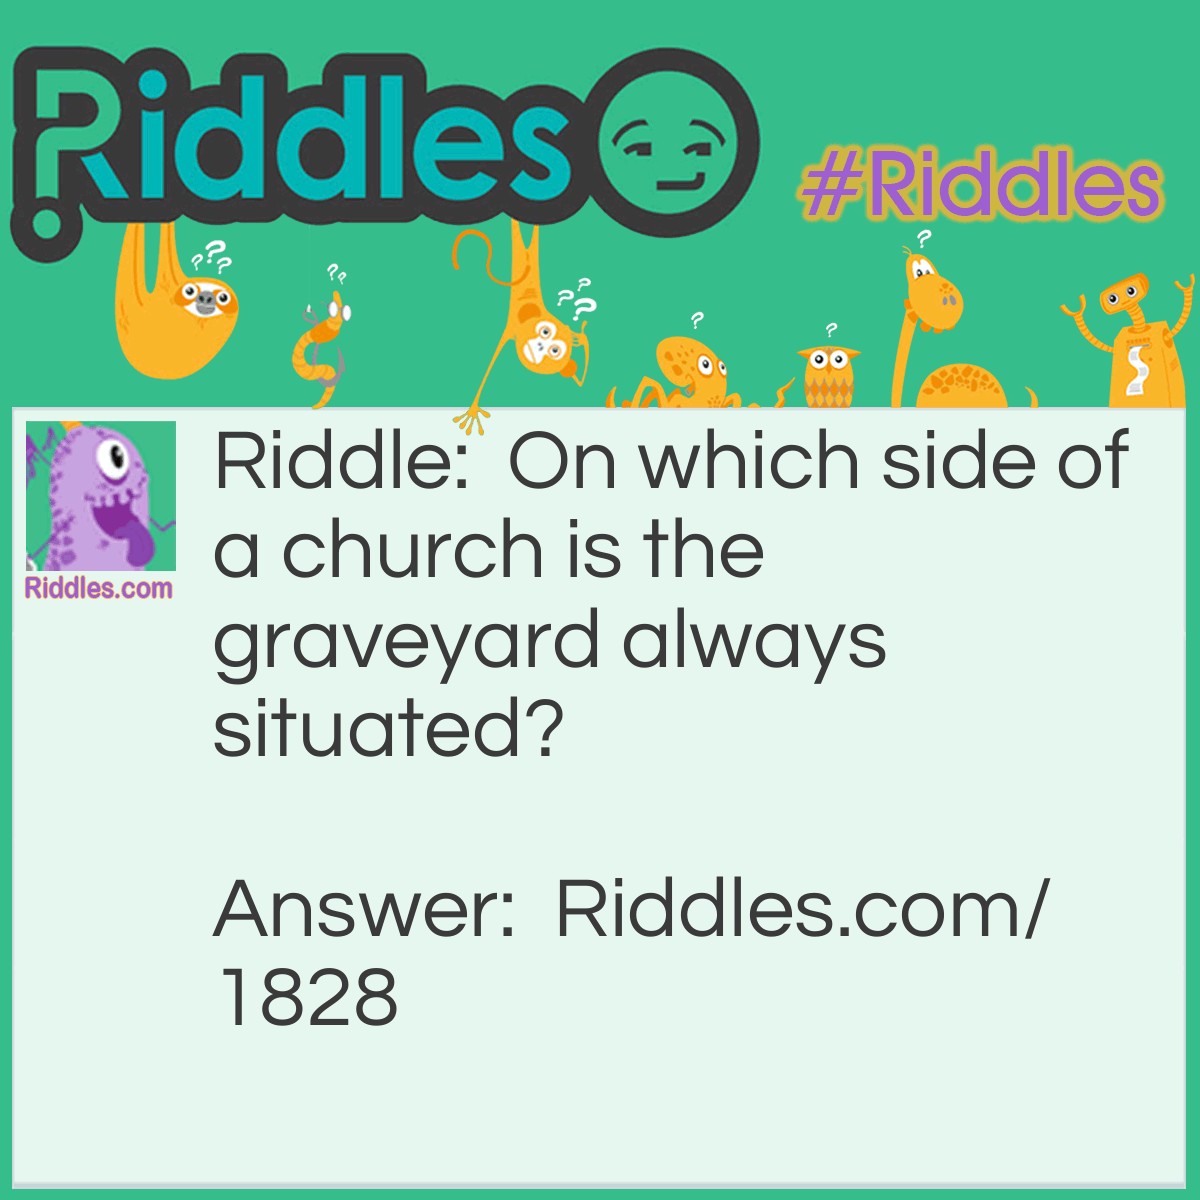 Riddle: On which side of a church is the graveyard always situated? Answer: On the outside, of course.